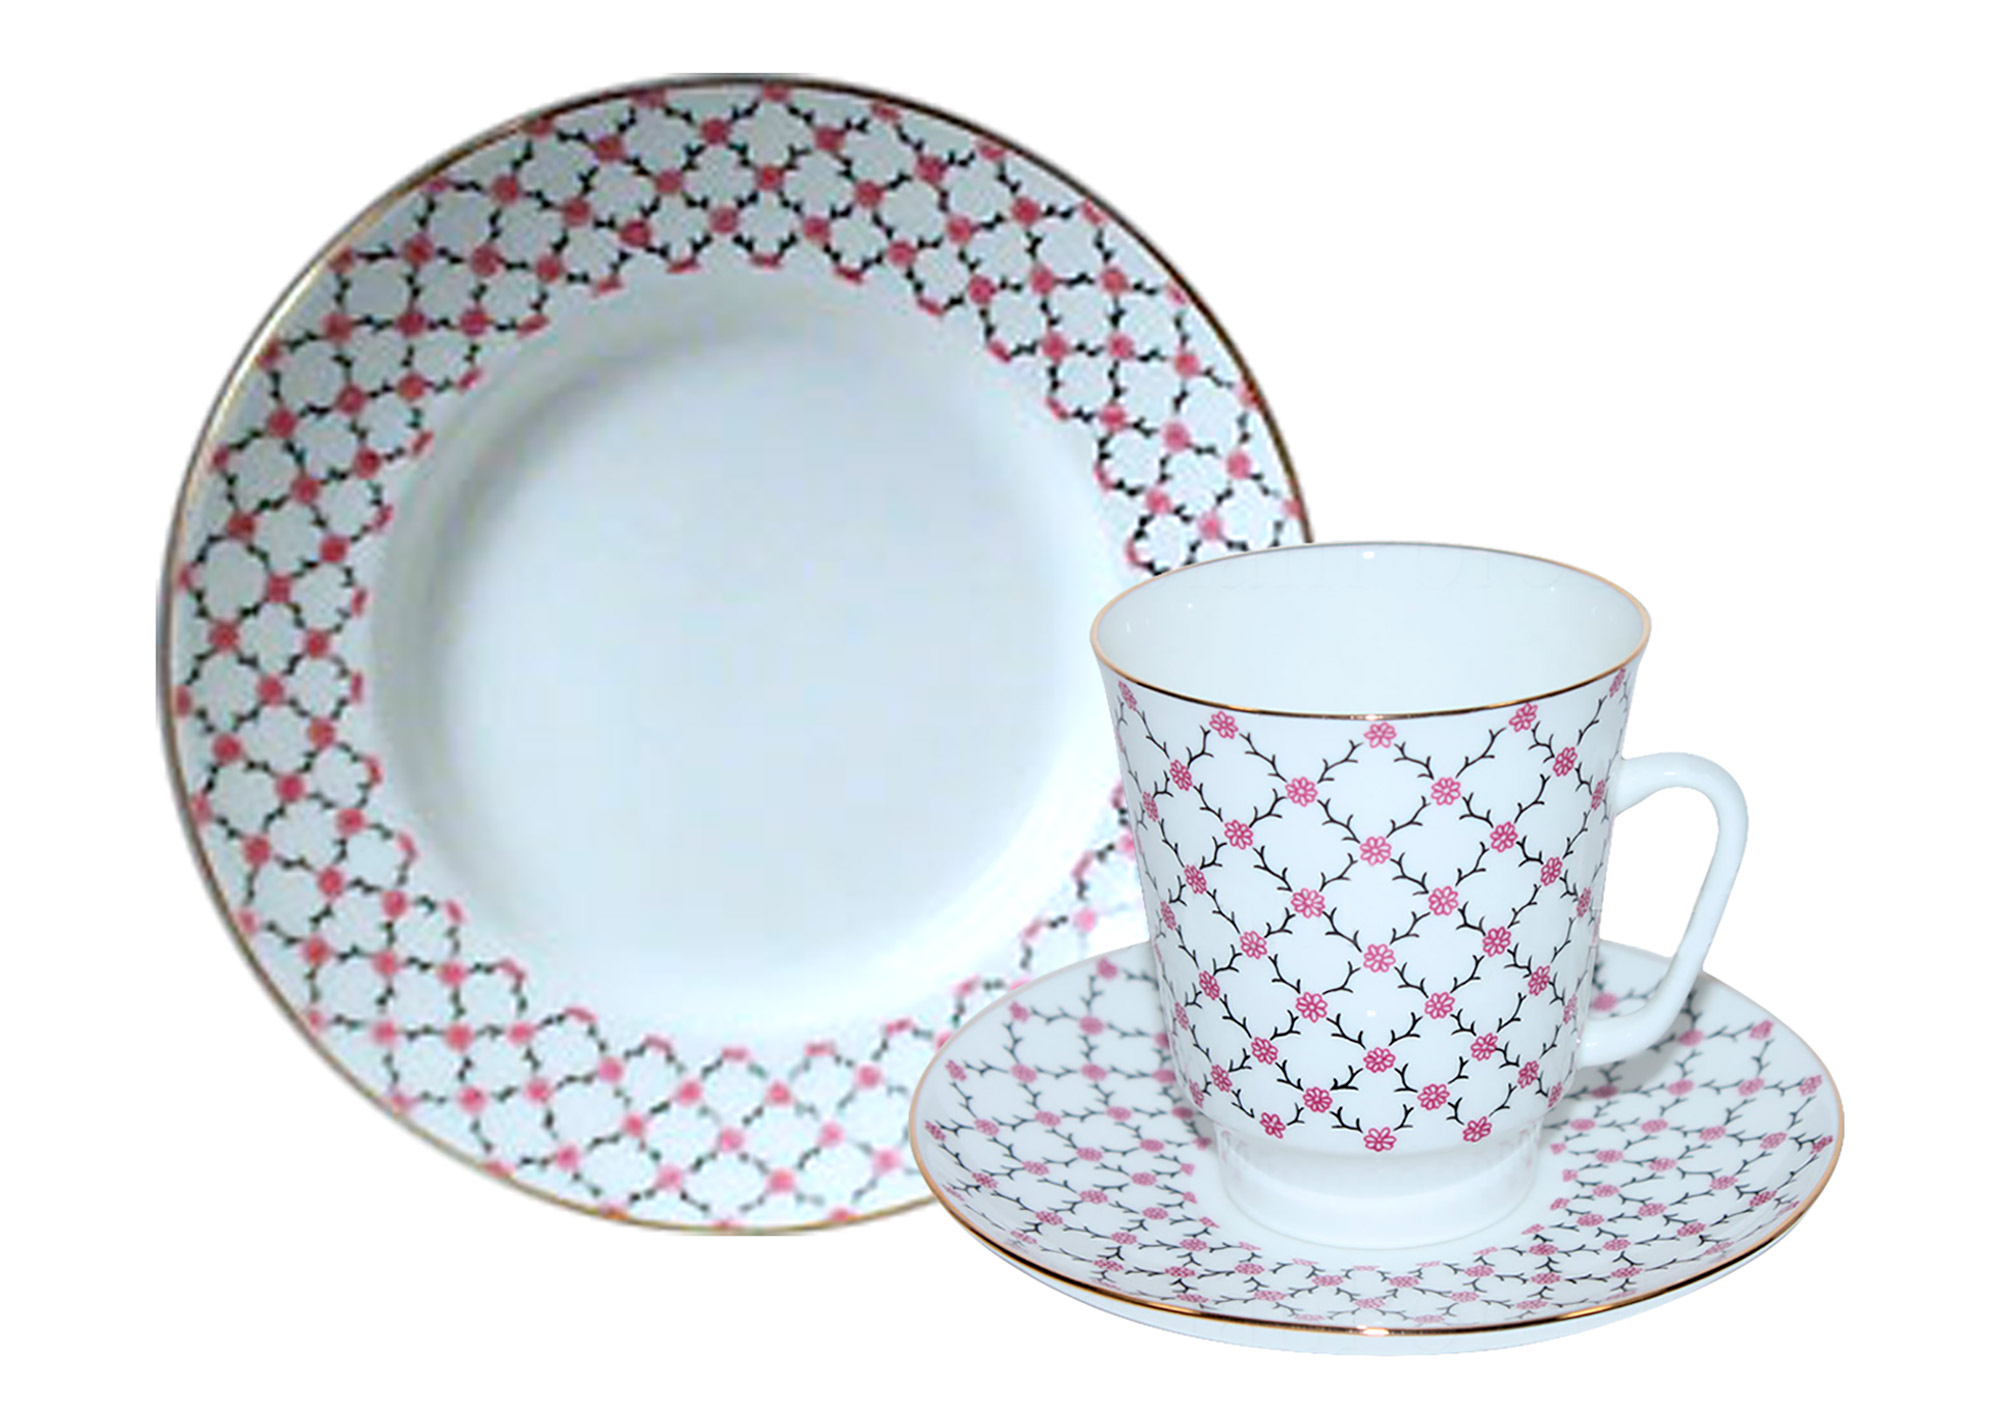 Buy Pink Net Cup and Saucer May Shape at GoldenCockerel.com